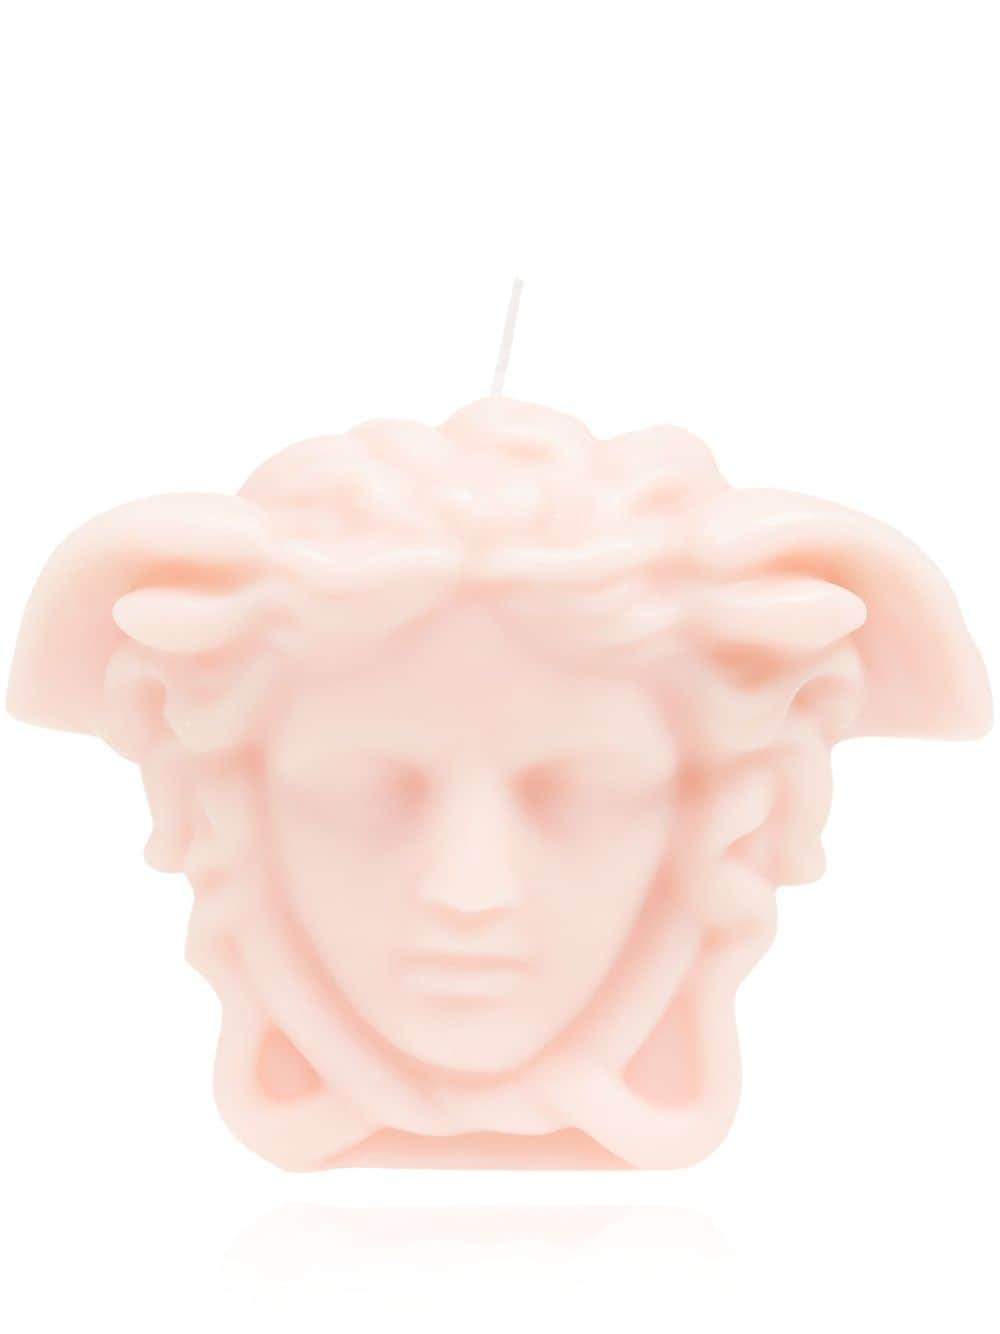 Versace Small Medusa Head Candle (590g) In Pink